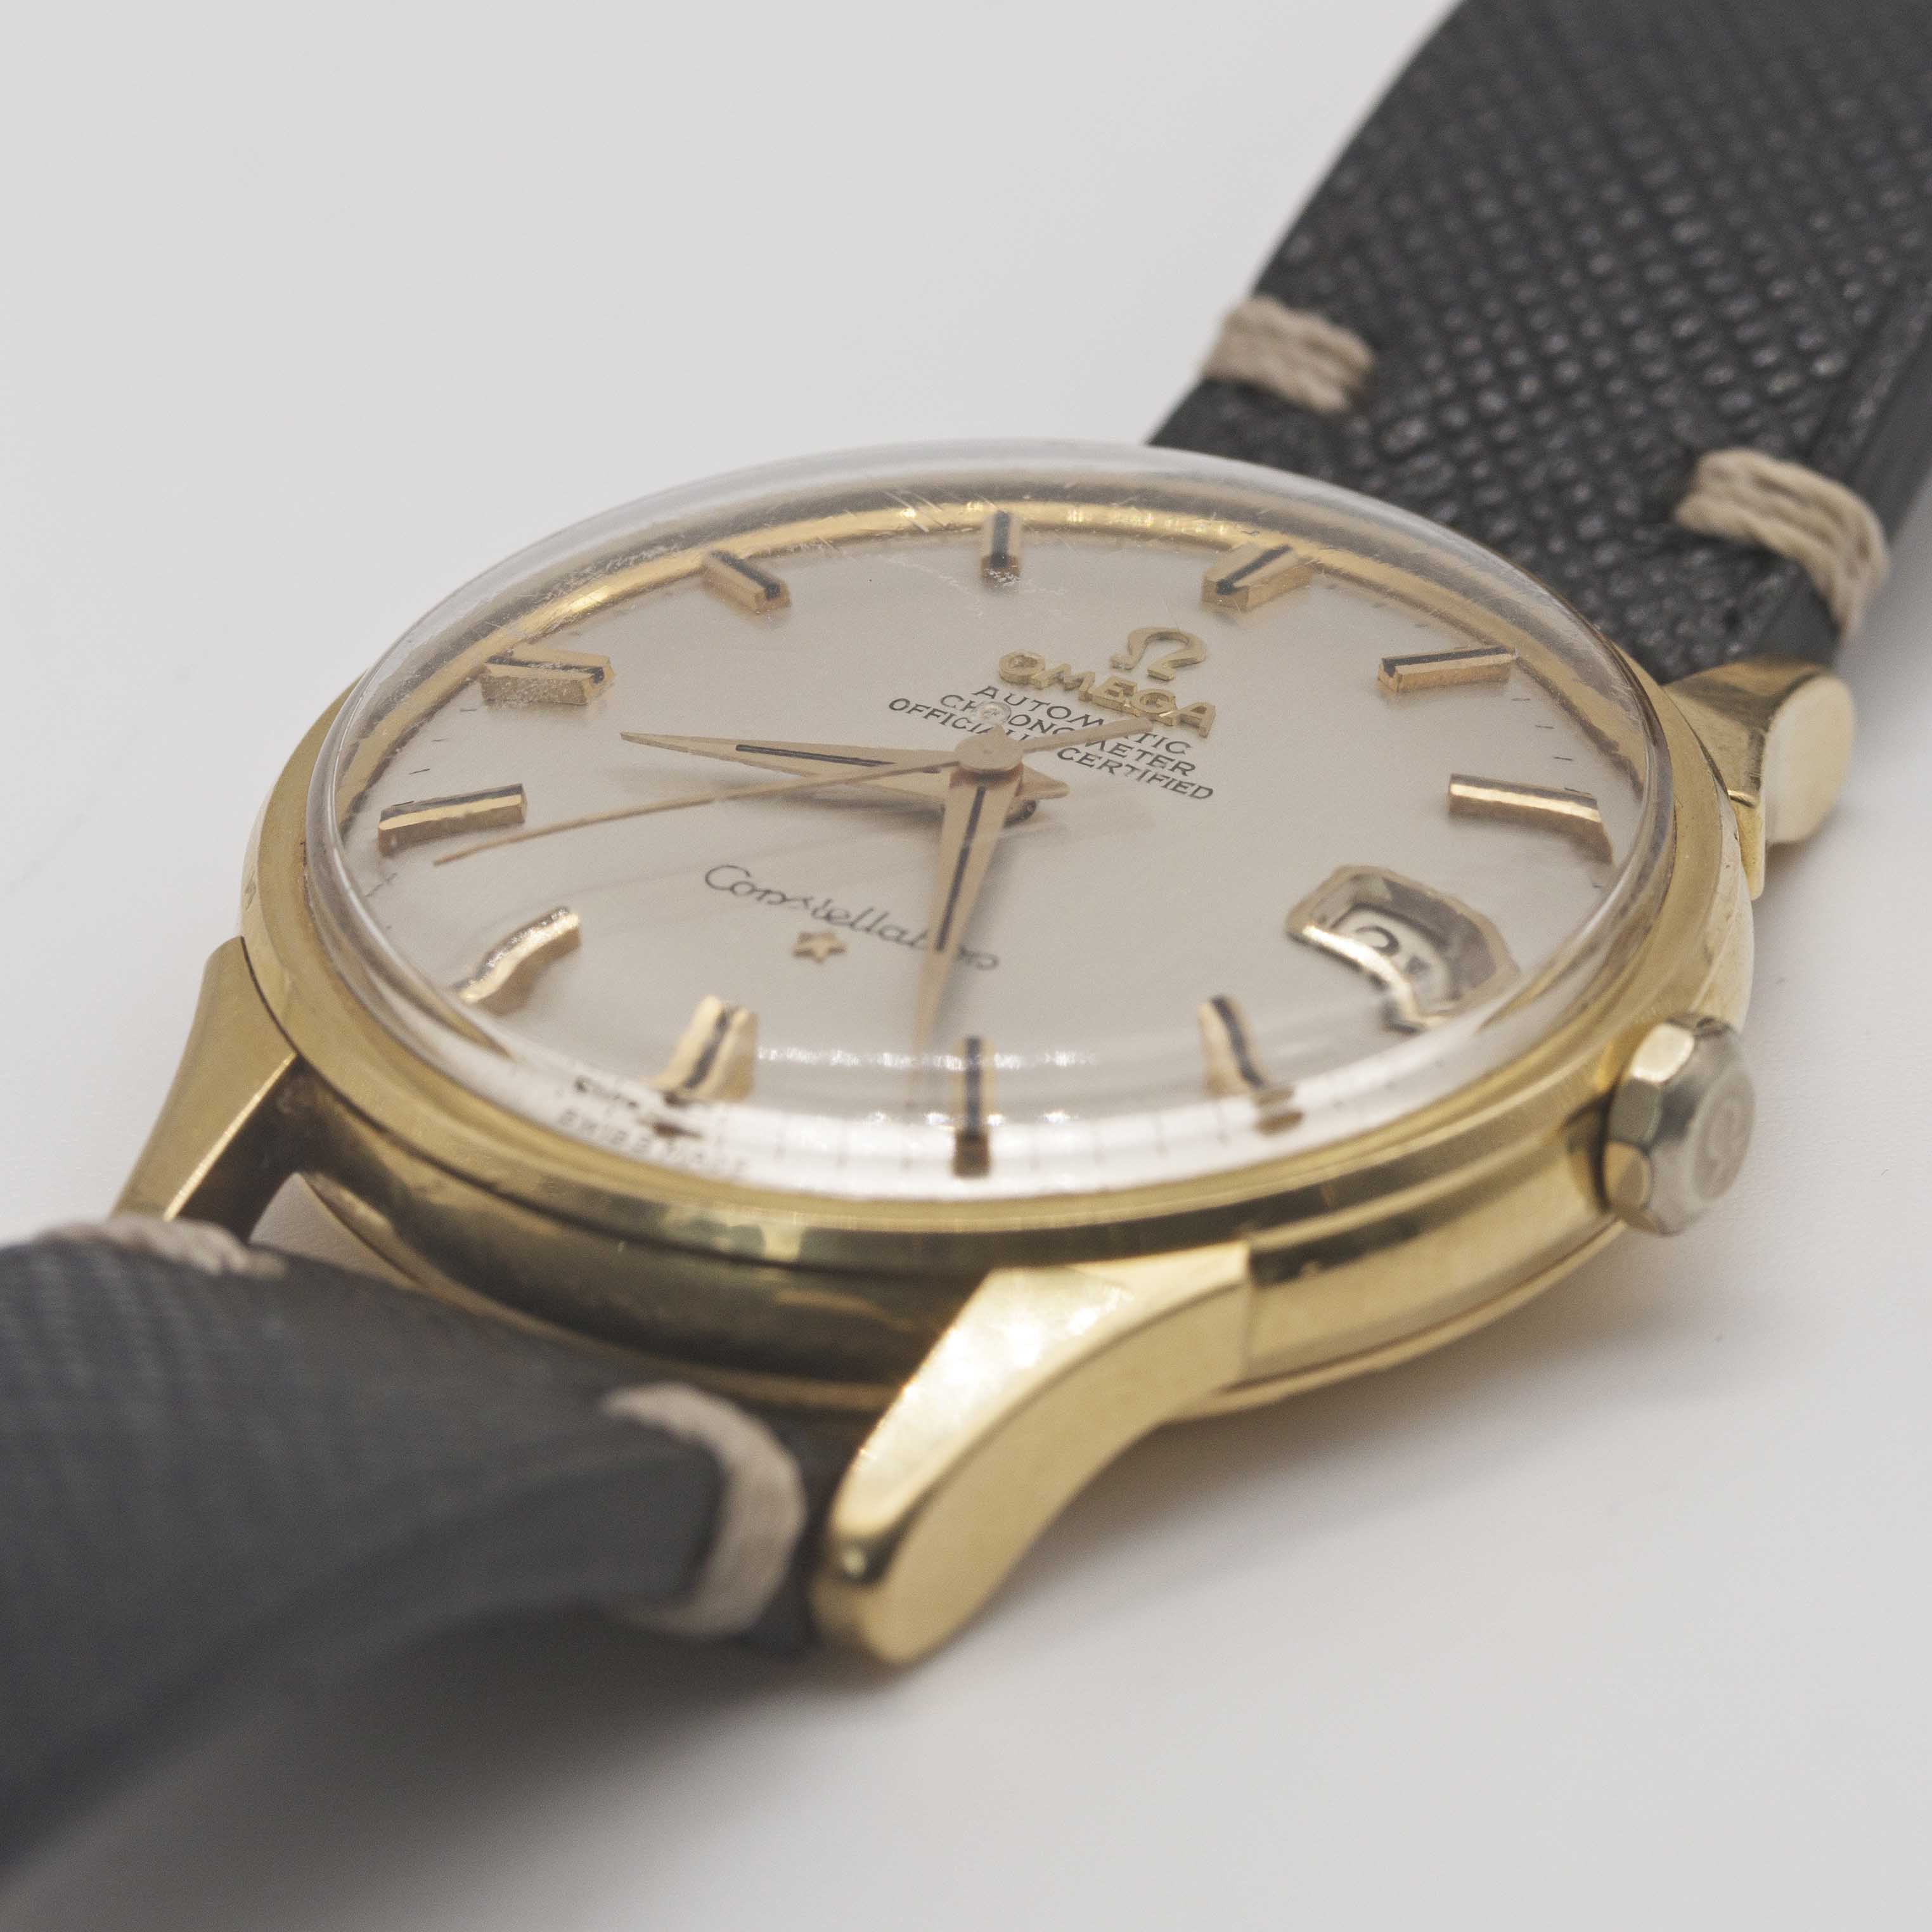 A GENTLEMAN'S 18K SOLID YELLOW GOLD OMEGA CONSTELLATION DATE CHRONOMETER WRIST WATCH CIRCA 1966, - Image 3 of 9